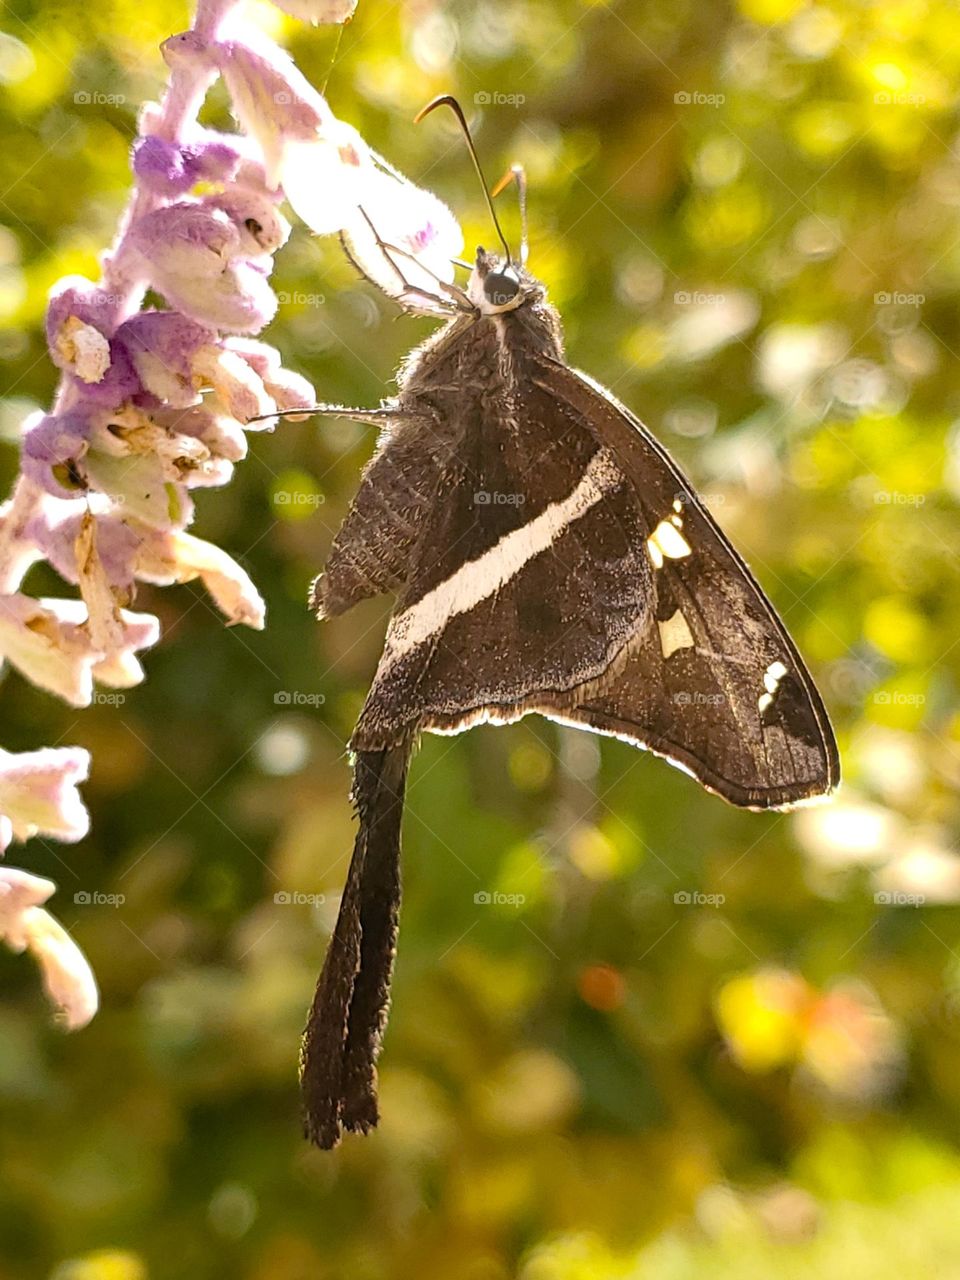 Longtail butterfly feeding on Mexican sage flower nectar.